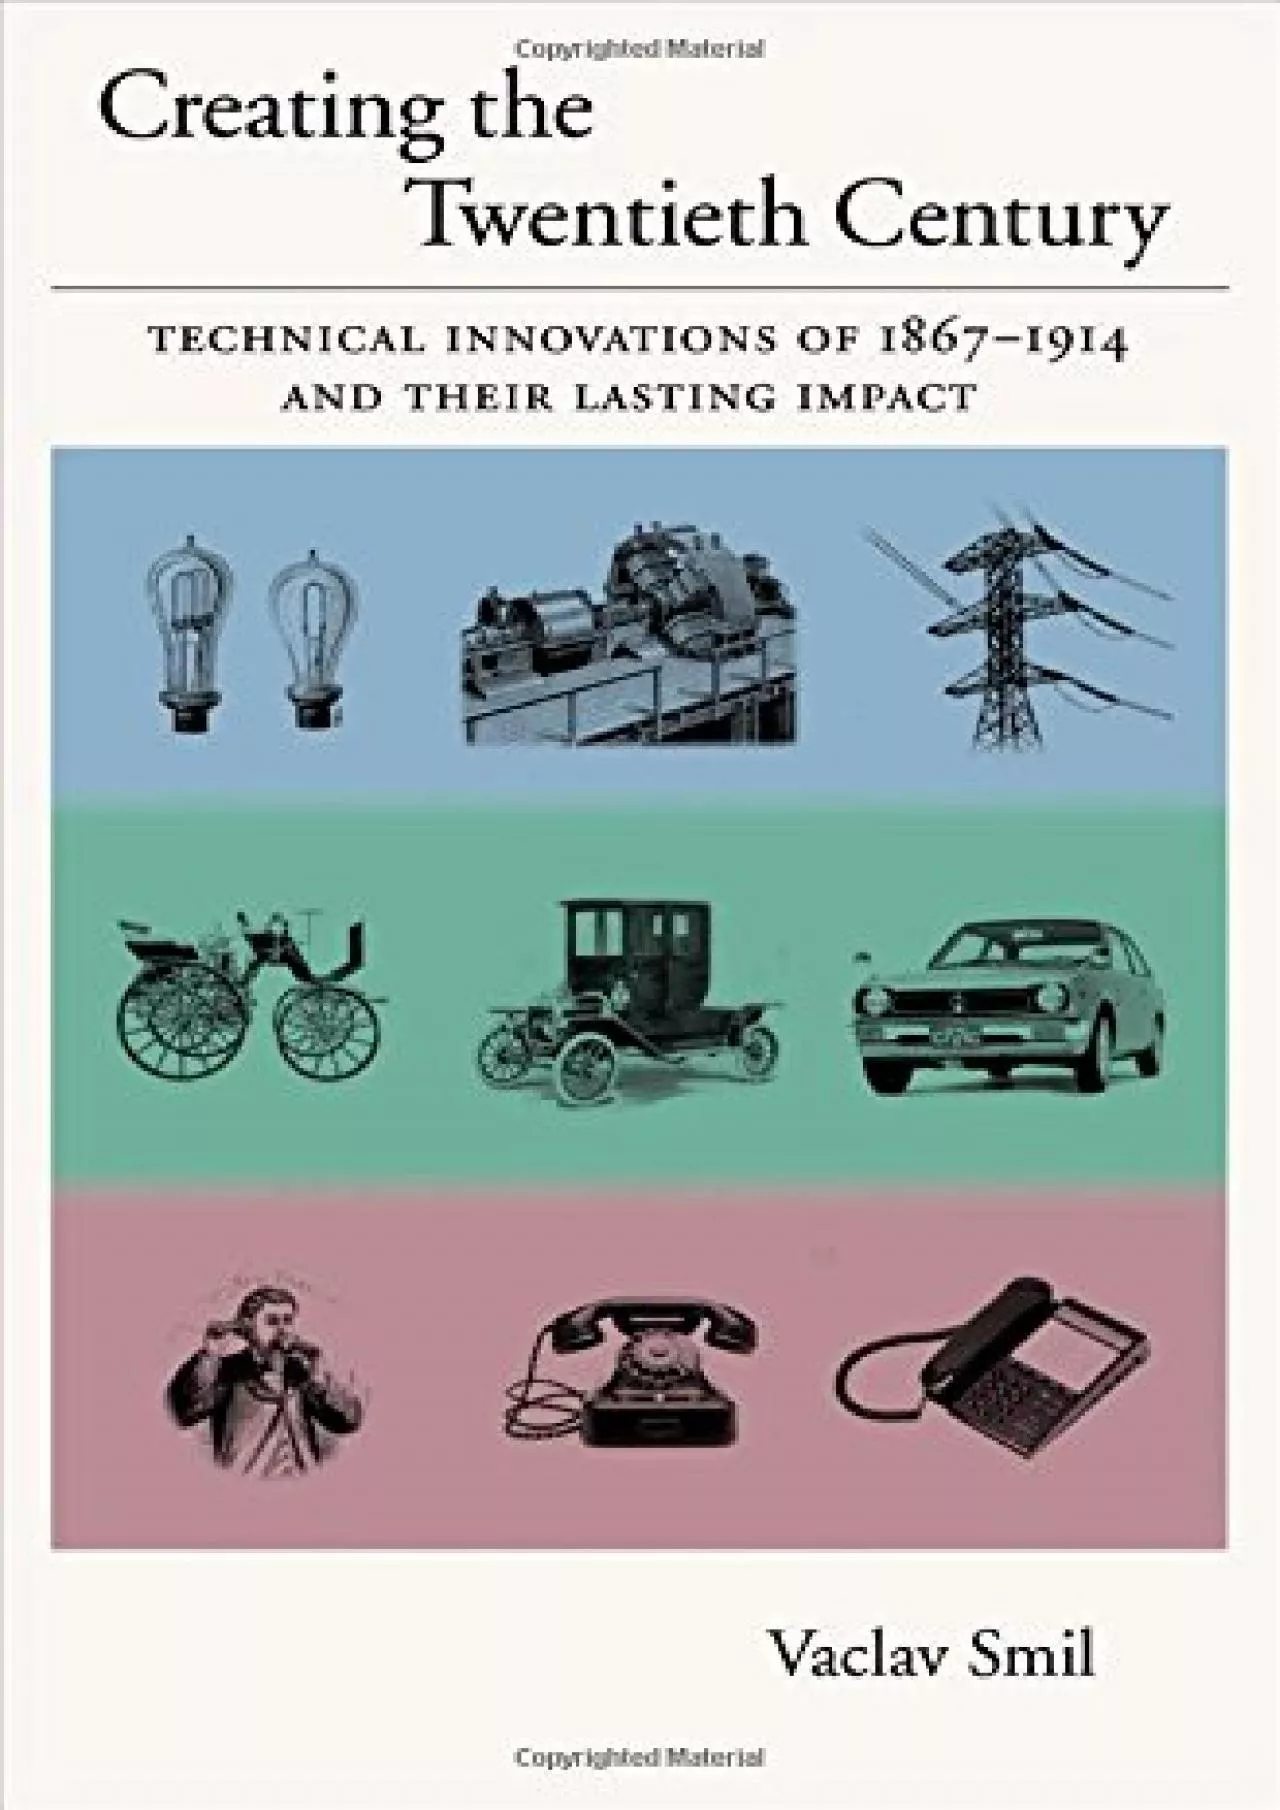 [EBOOK]-Creating the Twentieth Century: Technical Innovations of 1867-1914 and Their Lasting